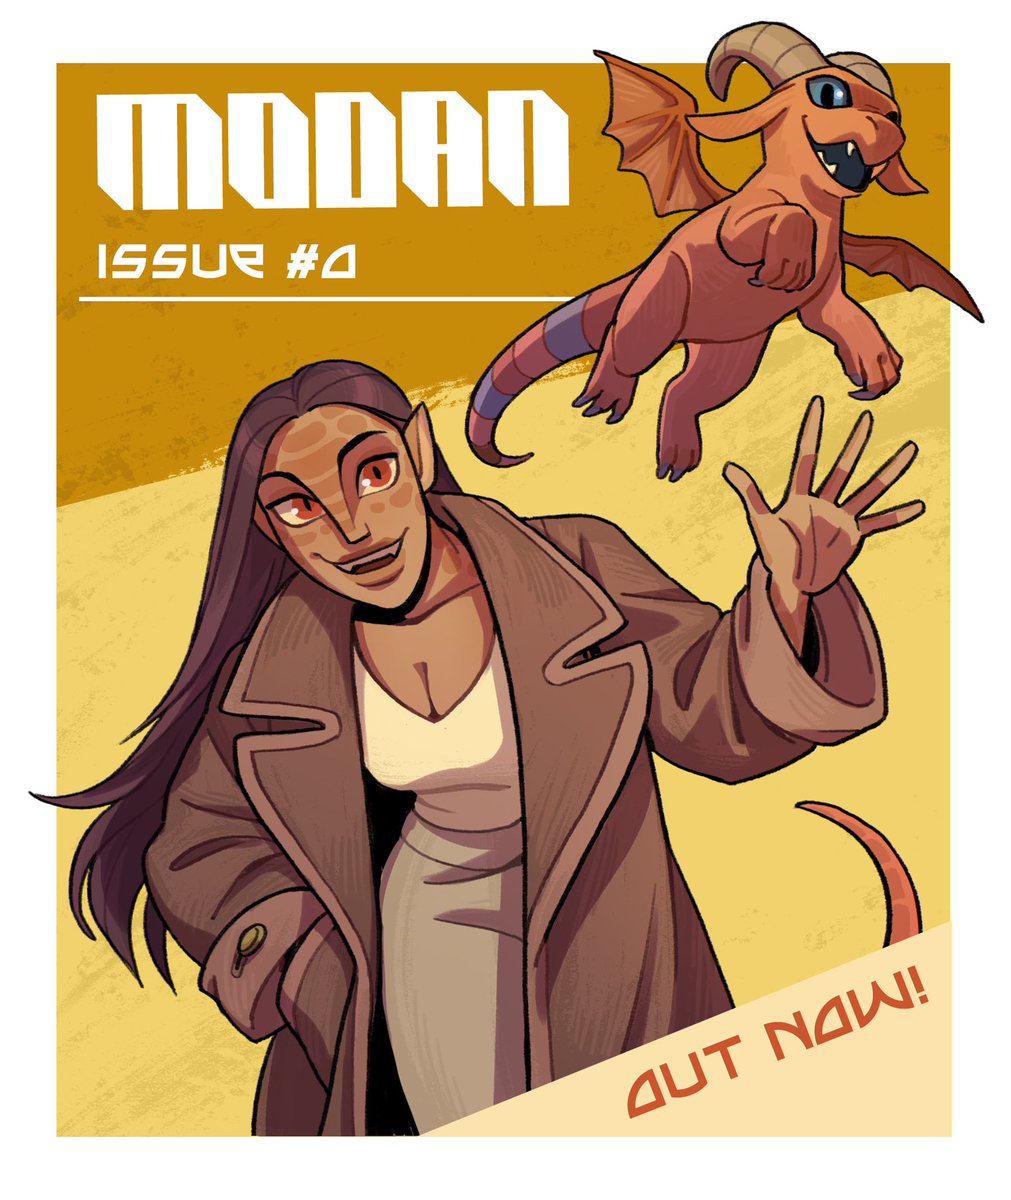 A little late to announce… But MODAN Issue #0 is out check it out!